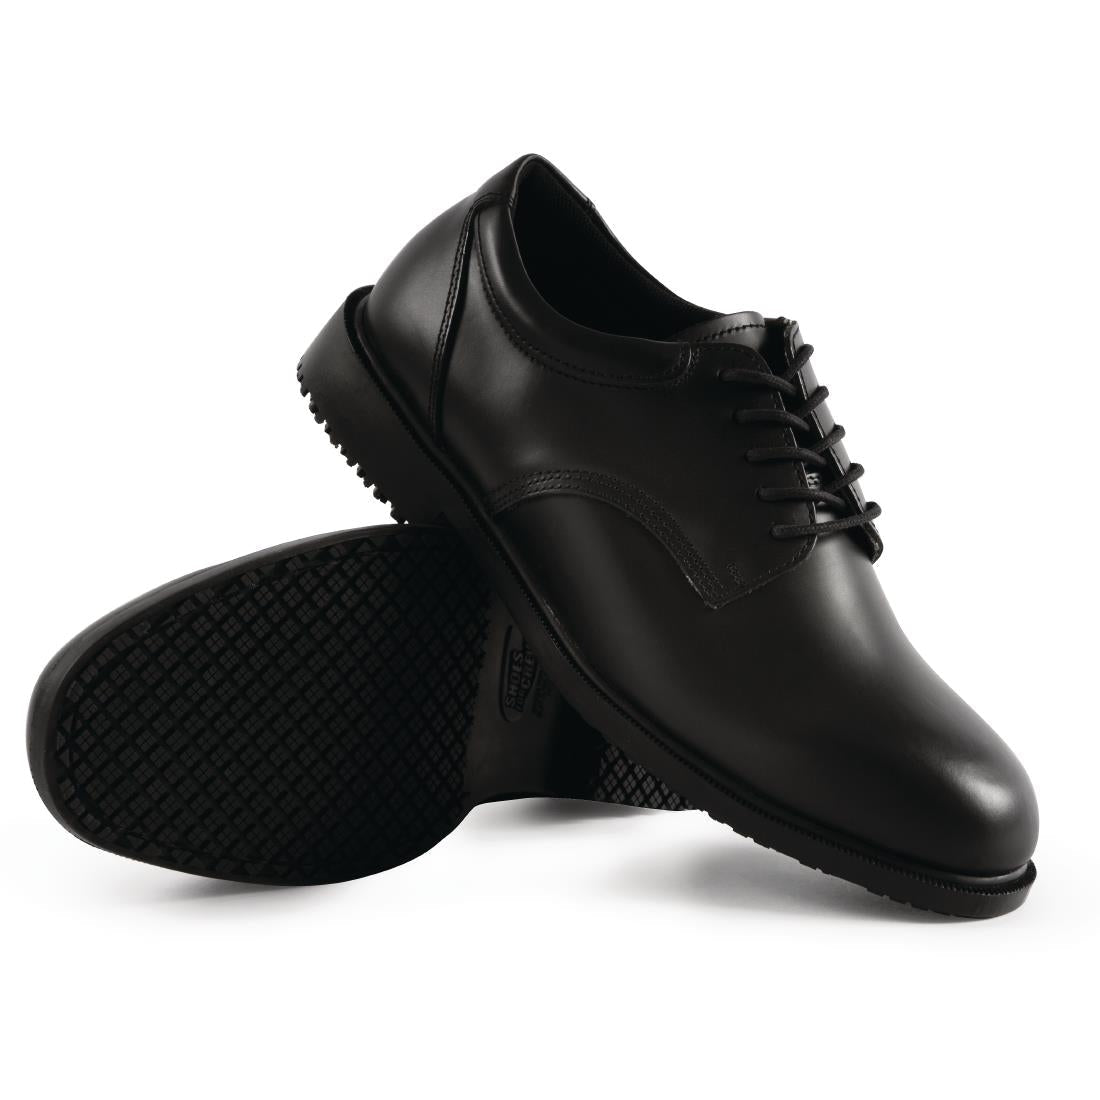 B110-48 Shoes For Crews Mens Dress Shoe Size 48 JD Catering Equipment Solutions Ltd